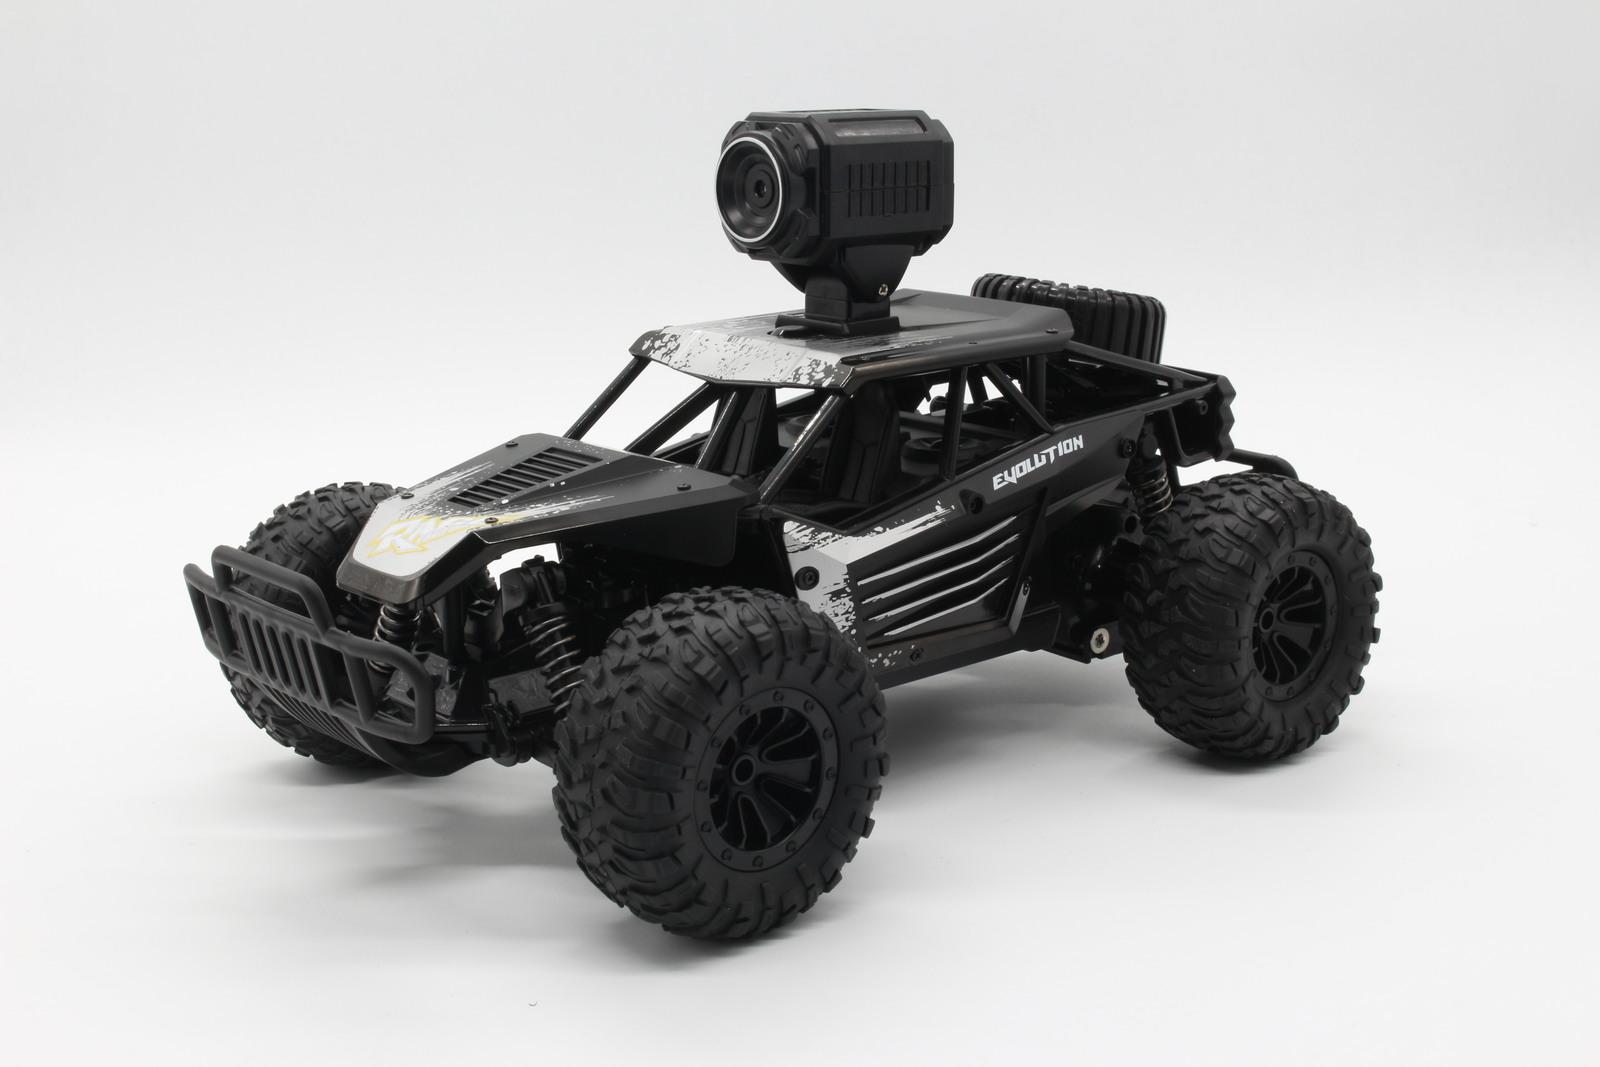 RC Car 1080P FPV Camera 1:16 Scale Off-Road Remote Control Truck Toy Gifts  for Kids Adults 2 Batteries for 60 Min Play